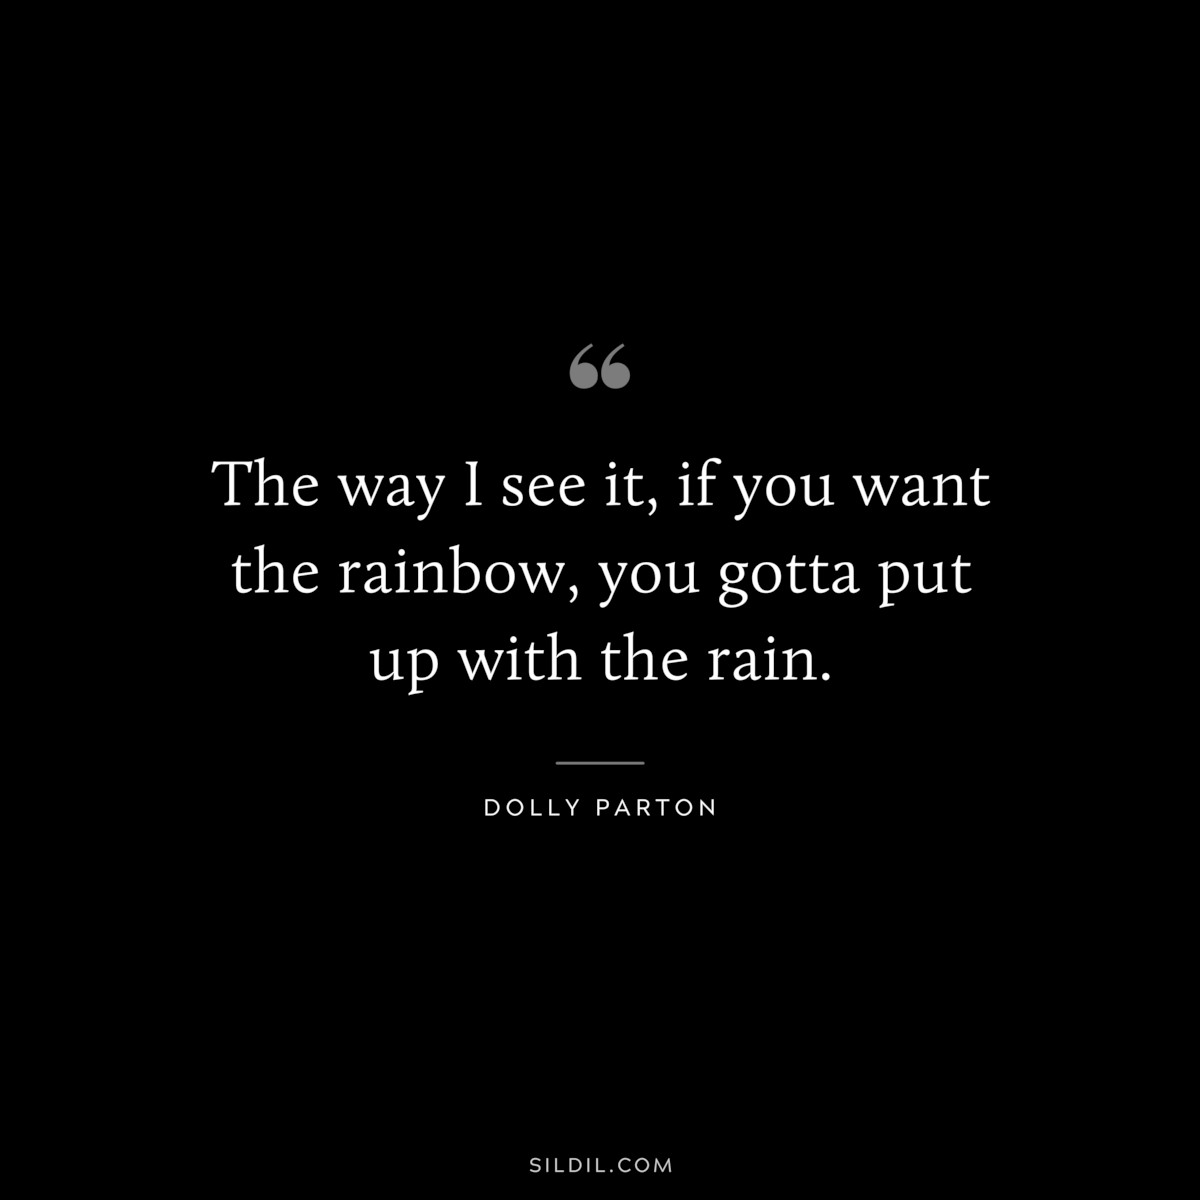 The way I see it, if you want the rainbow, you gotta put up with the rain. ― Dolly Parton